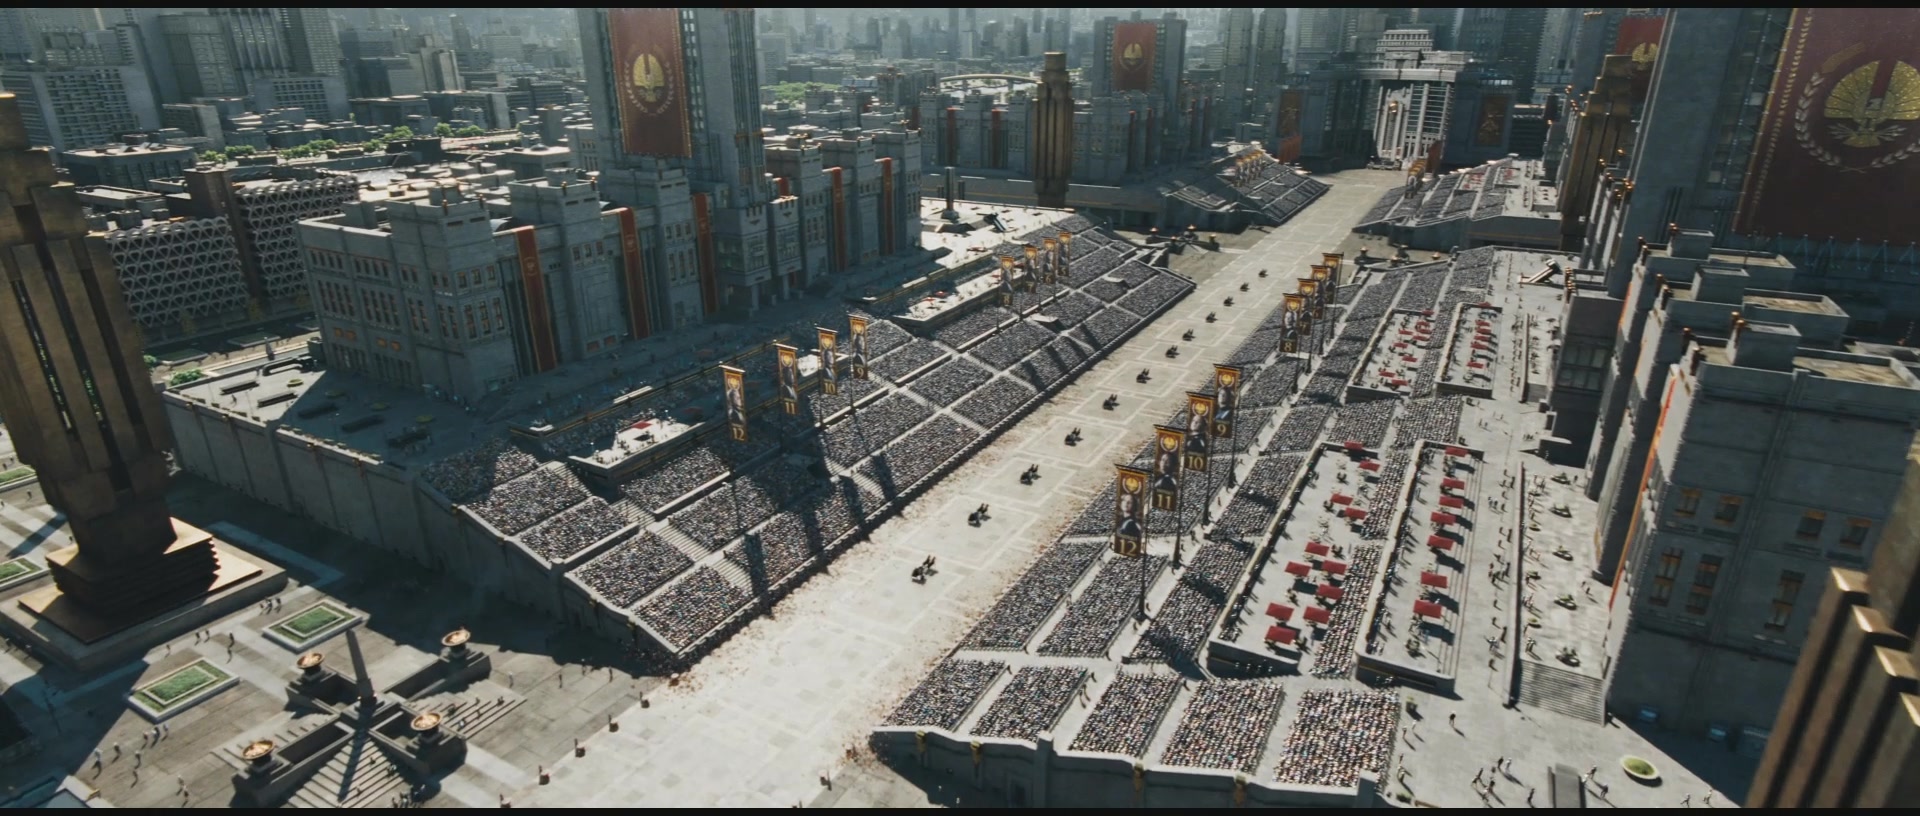 the capital of the hunger games